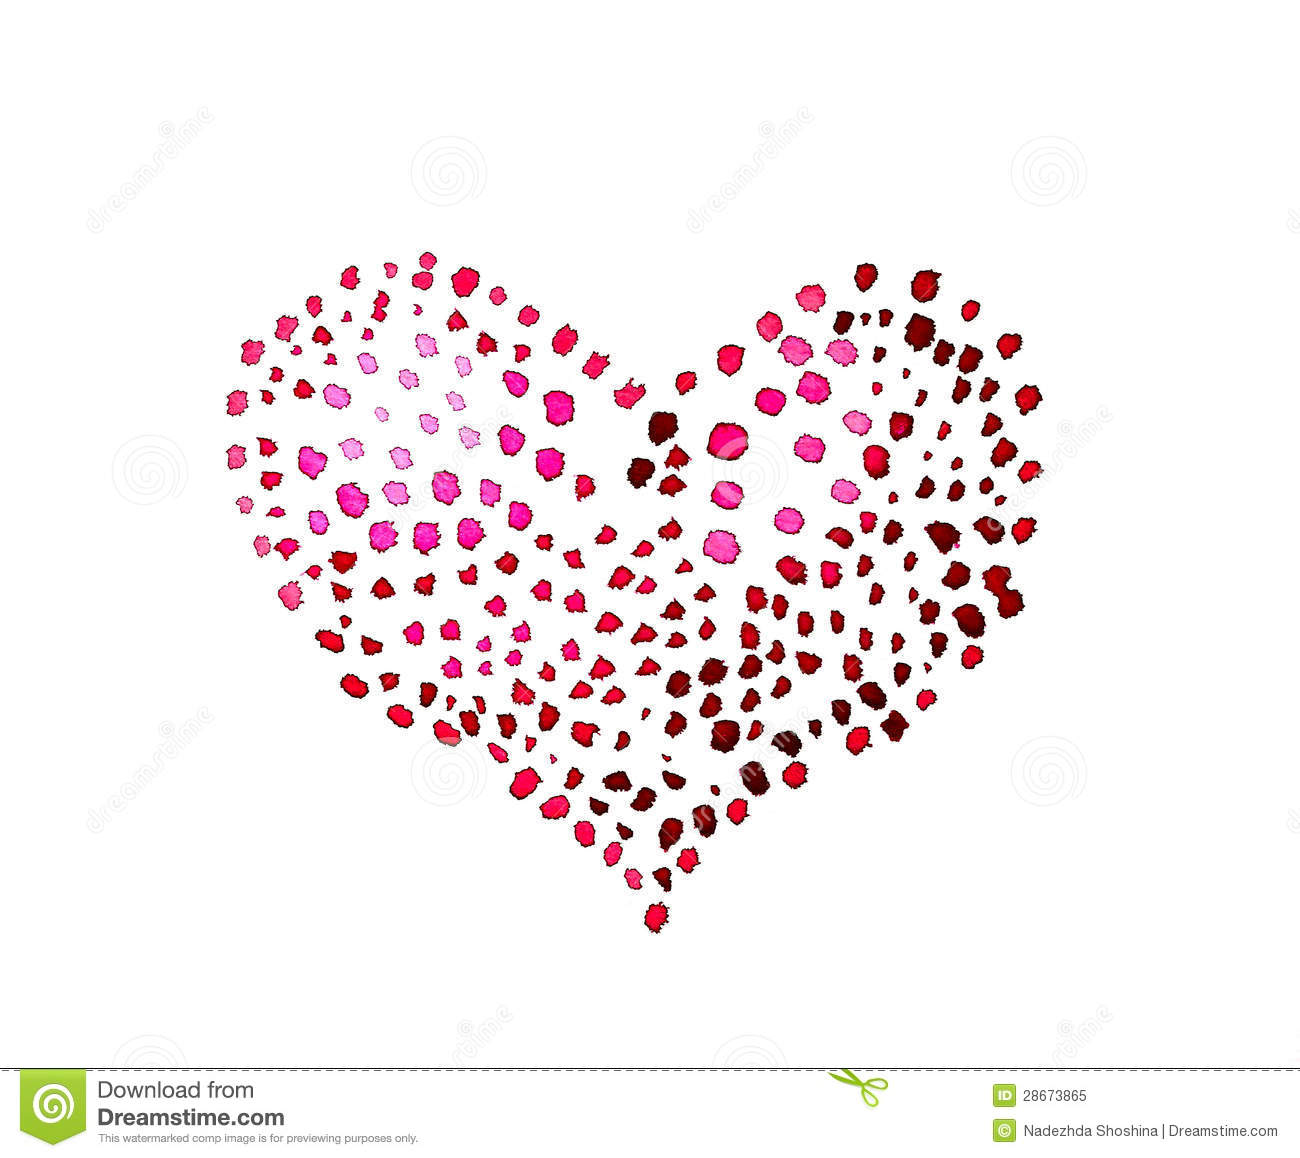 Spotted Heart Royalty Free Stock Photo   Image  28673865